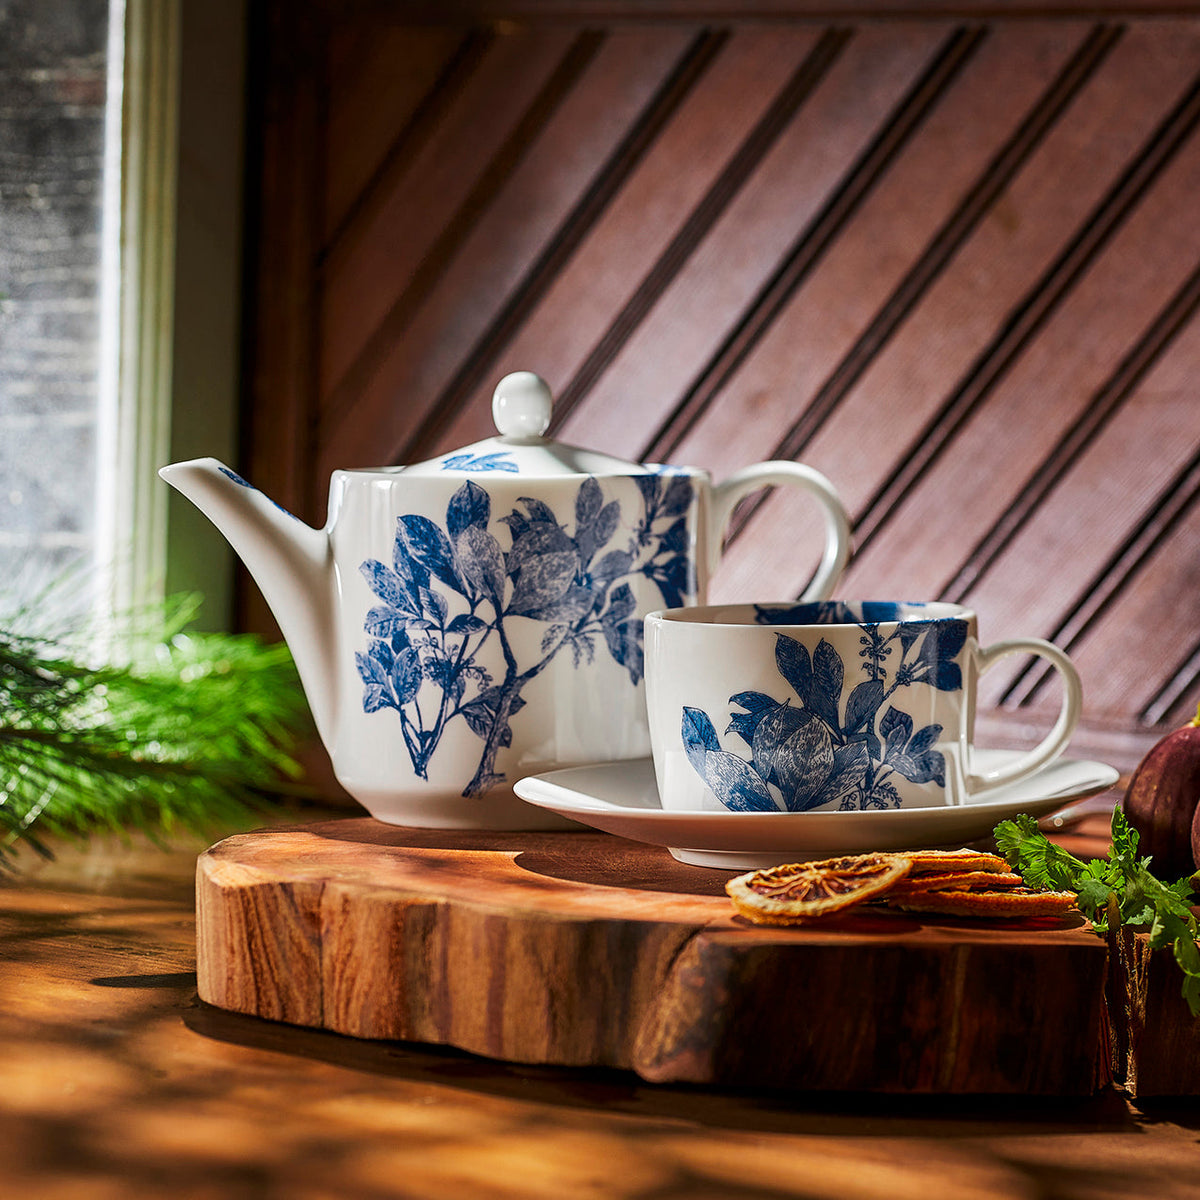 Arbor blue and white bone china teapot and tea cup and saucer from Caskata is shown on a rustic board in a window.